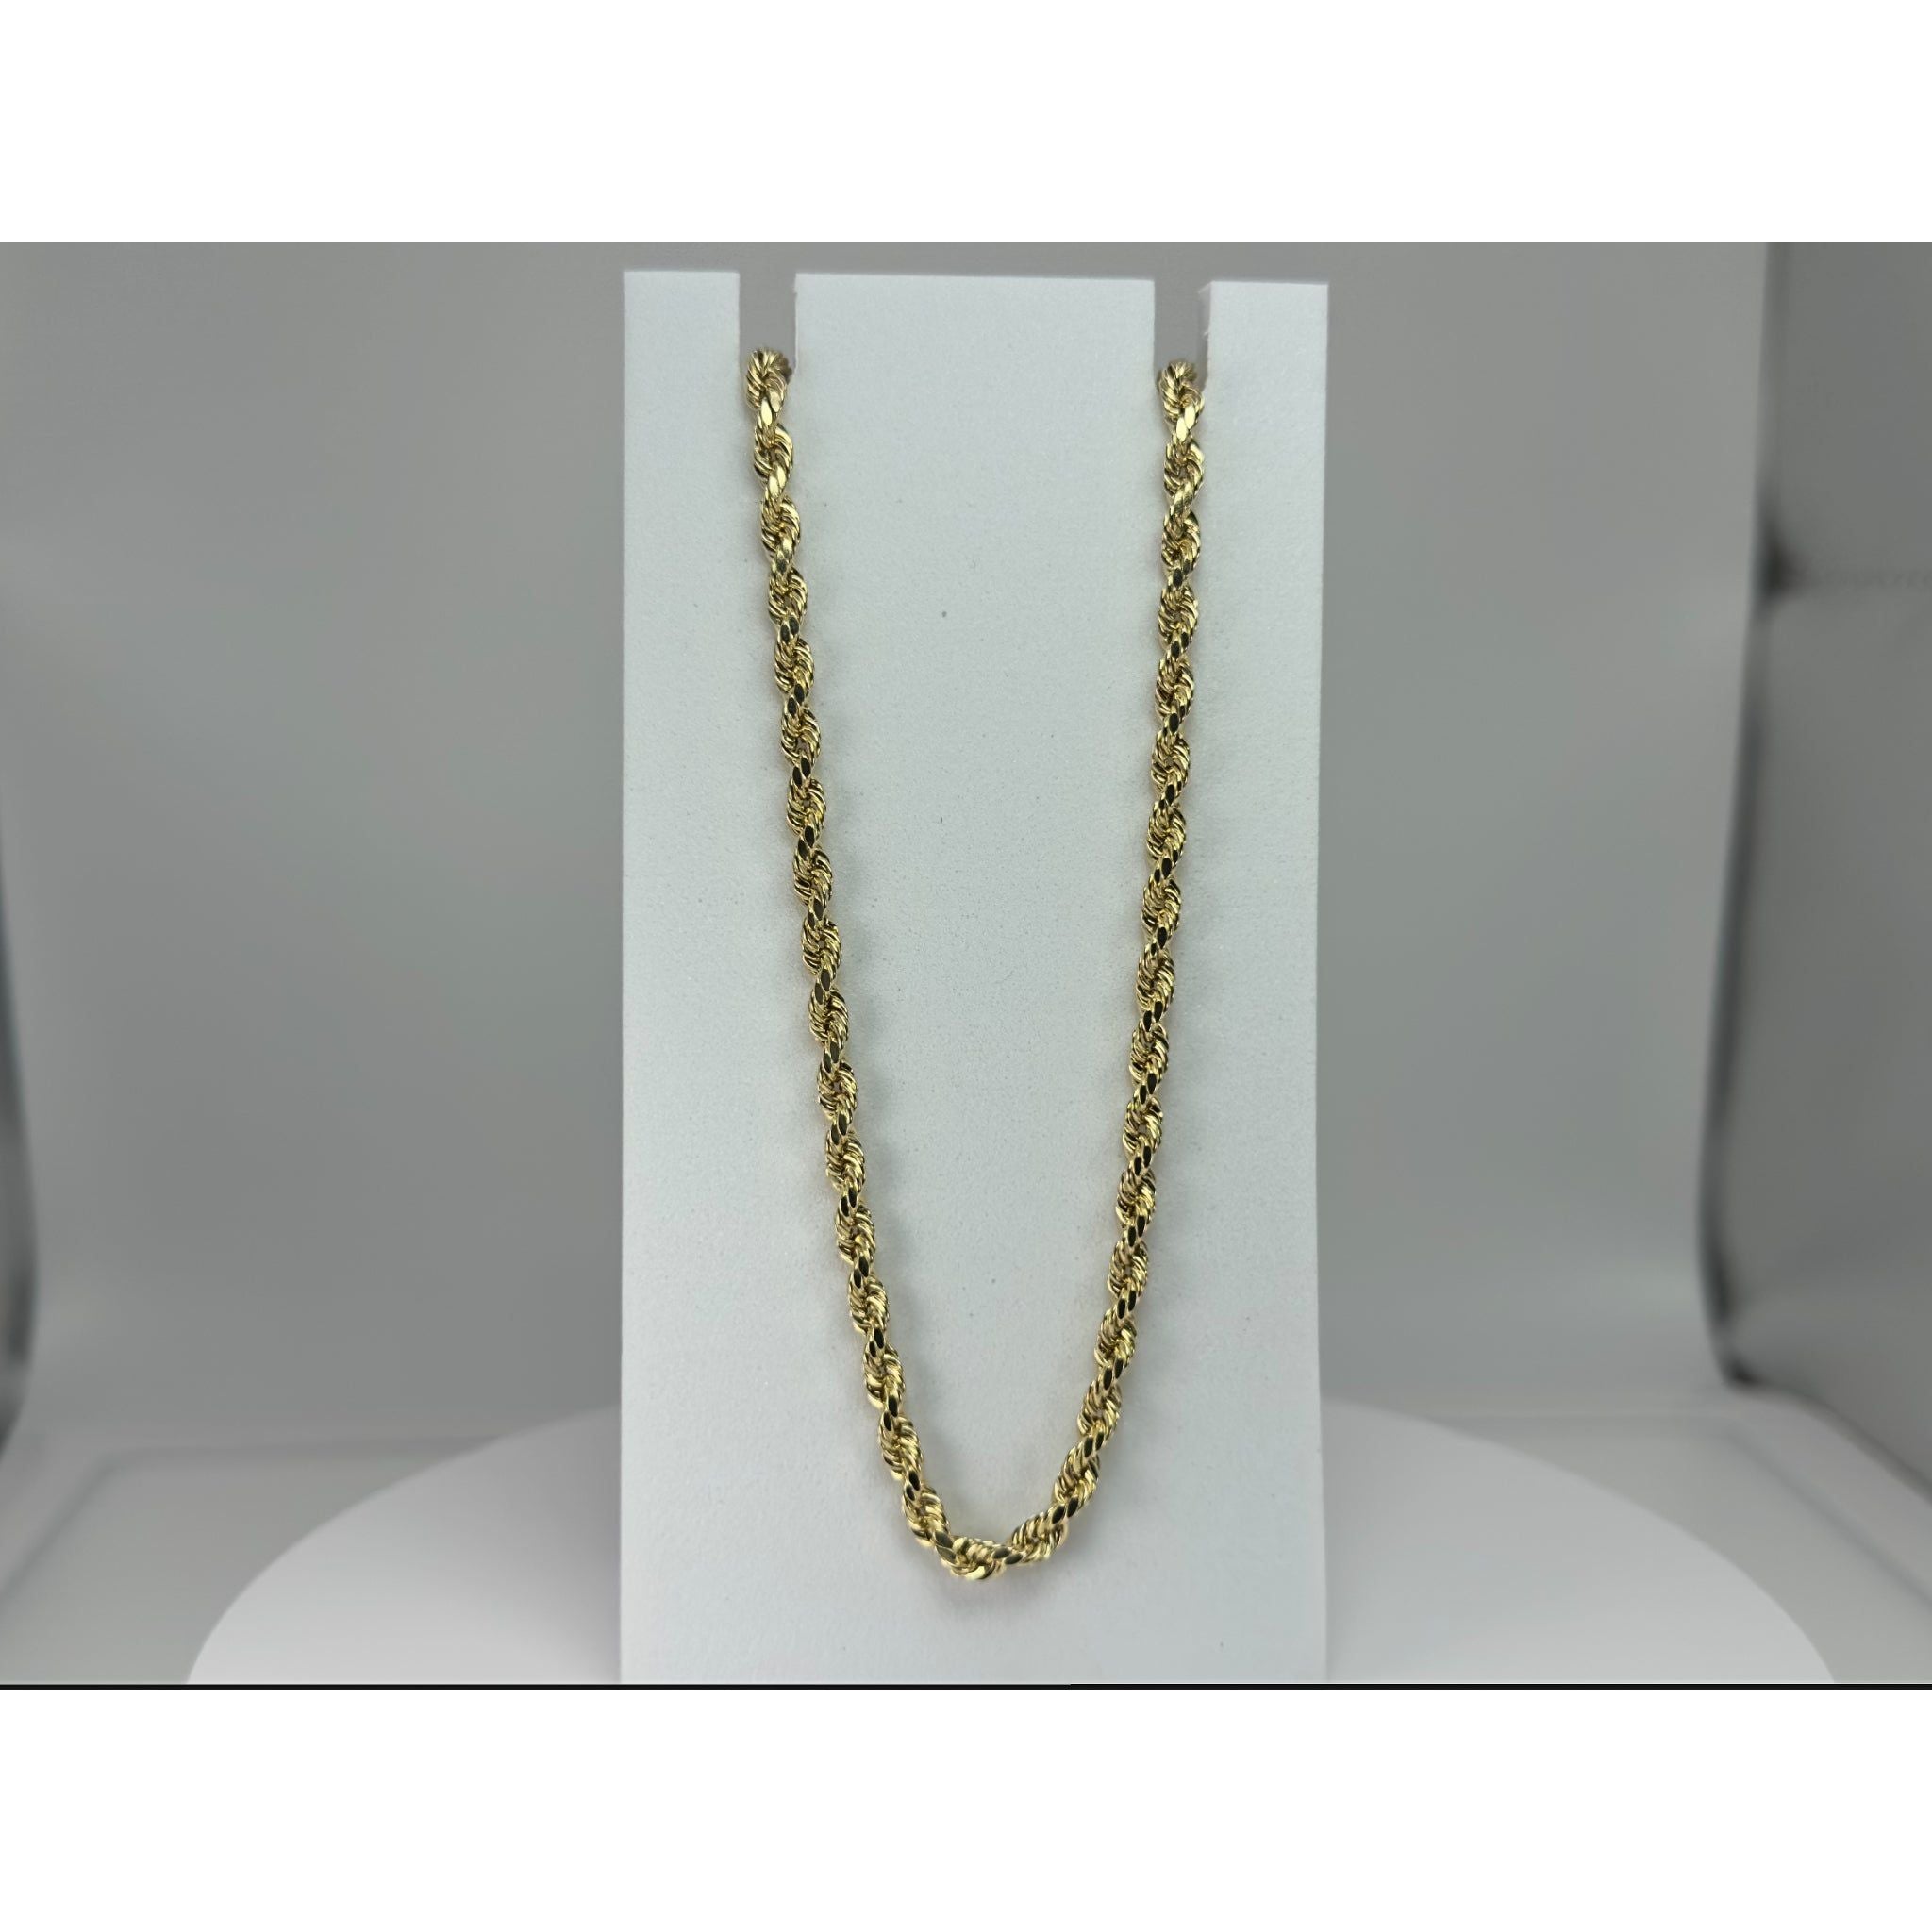 DR1735 - 14K Yellow Gold - Men's Gold Chains